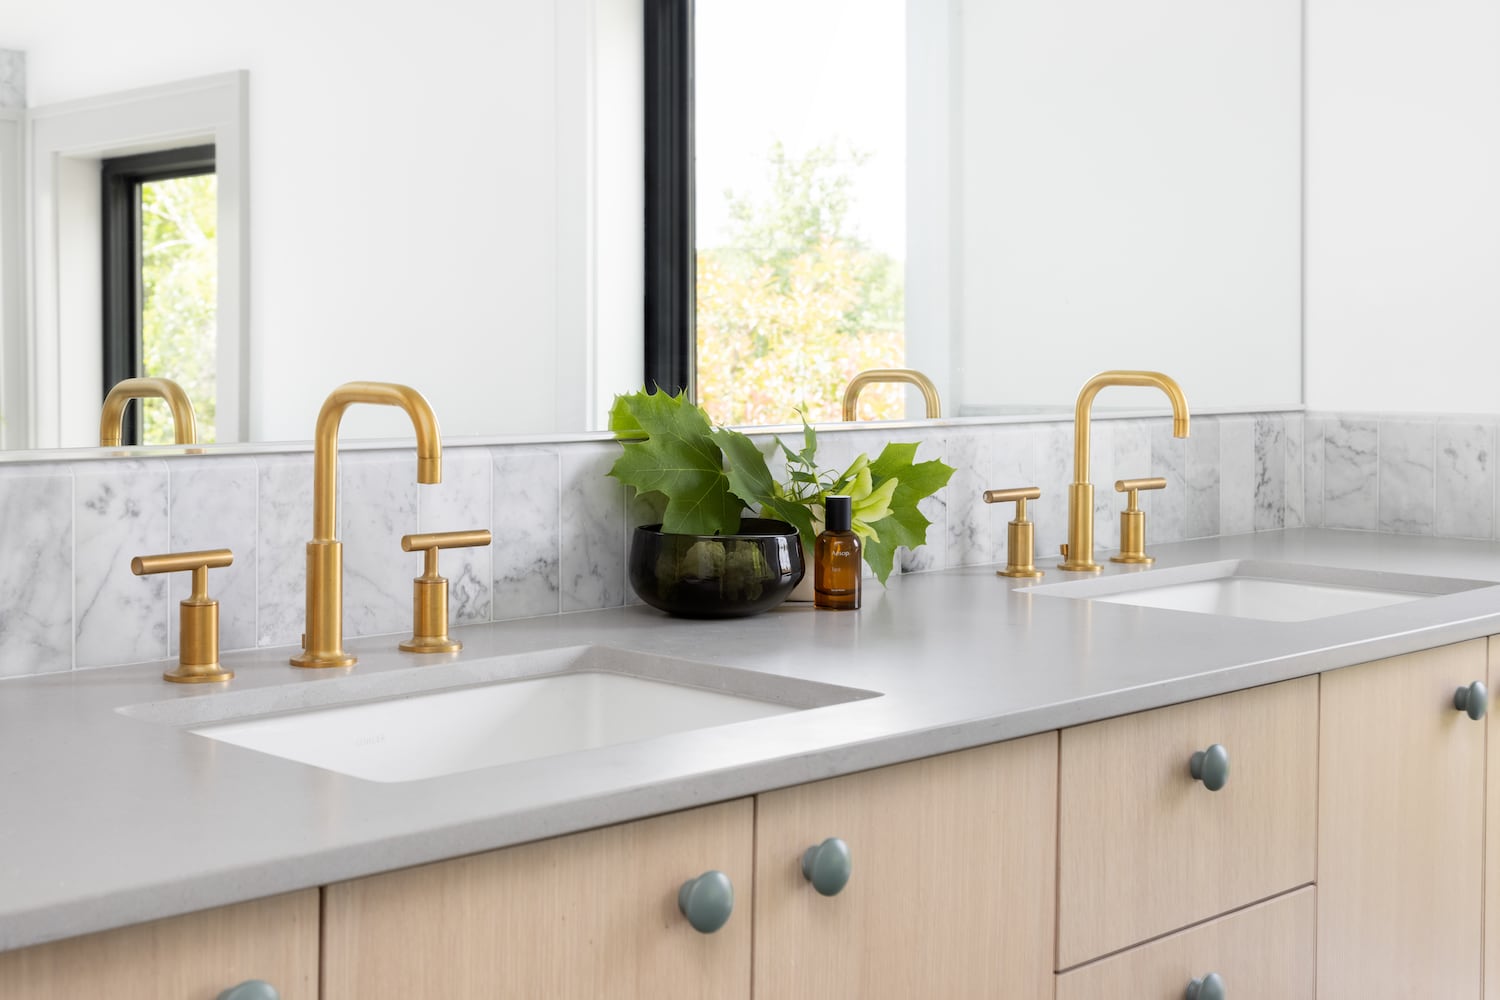 Detail of double sinks with polished gold fixtures, earth green cabinet pulls